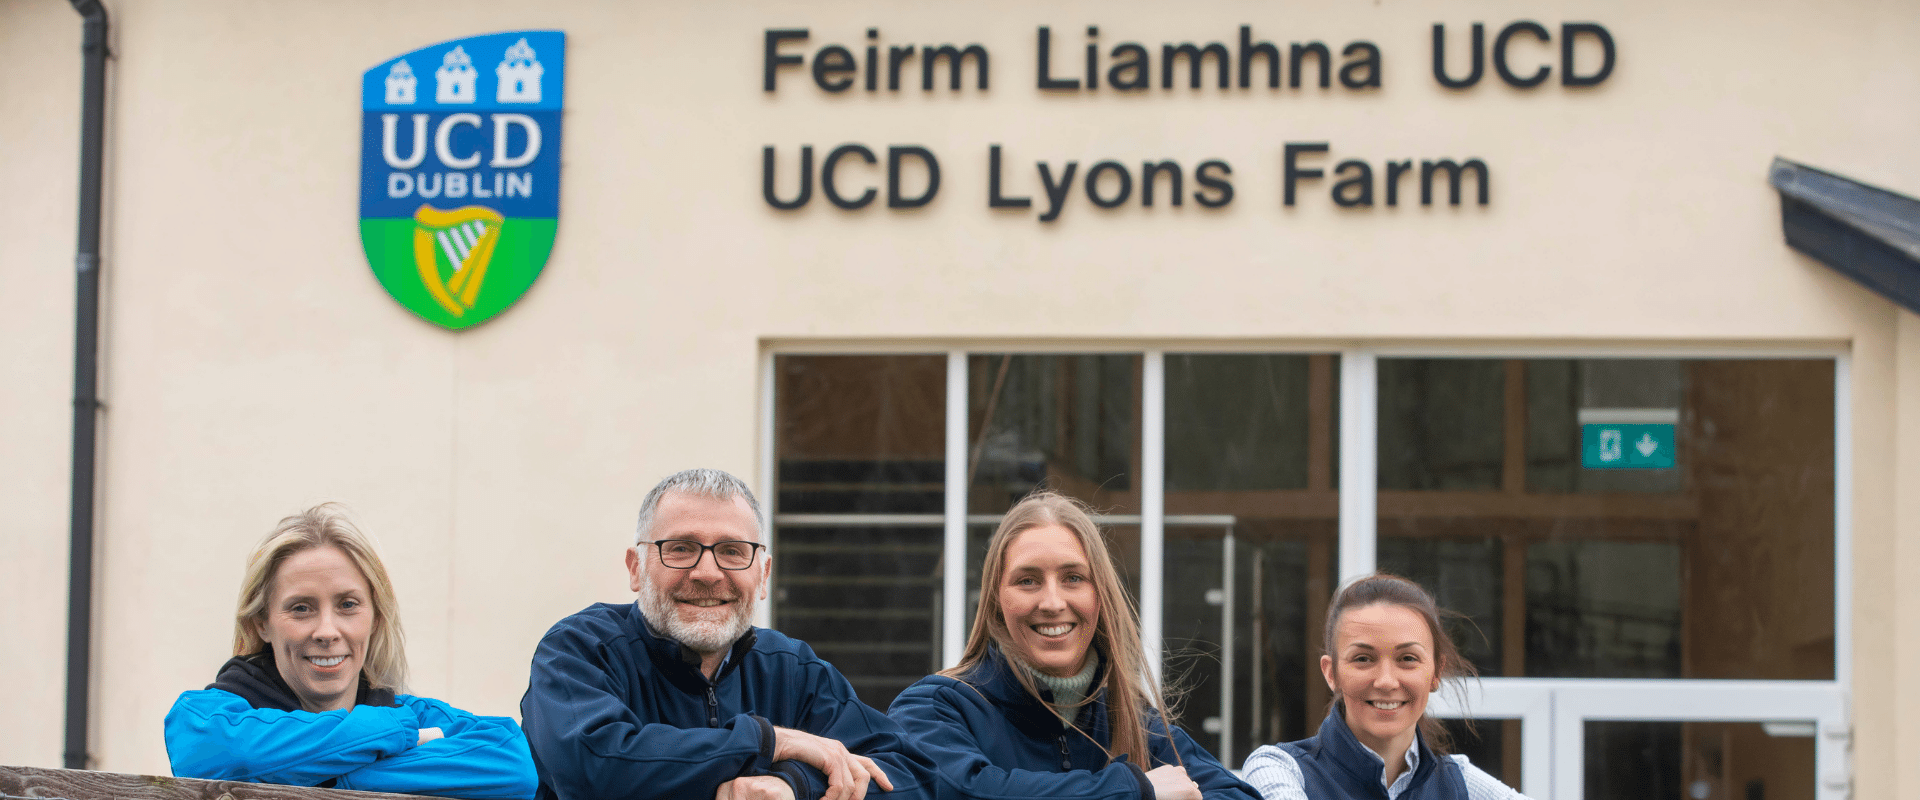 Lyons Farm has a permanent staff of 15 who are responsible for the day-to-day operation of the farm. Academic from the Schools of Agriculture and Food Science and the School of Veterinary Medicine deliver teaching and undertake research on the farm in addition to their teaching at the main UCD Campus in Belfield. 